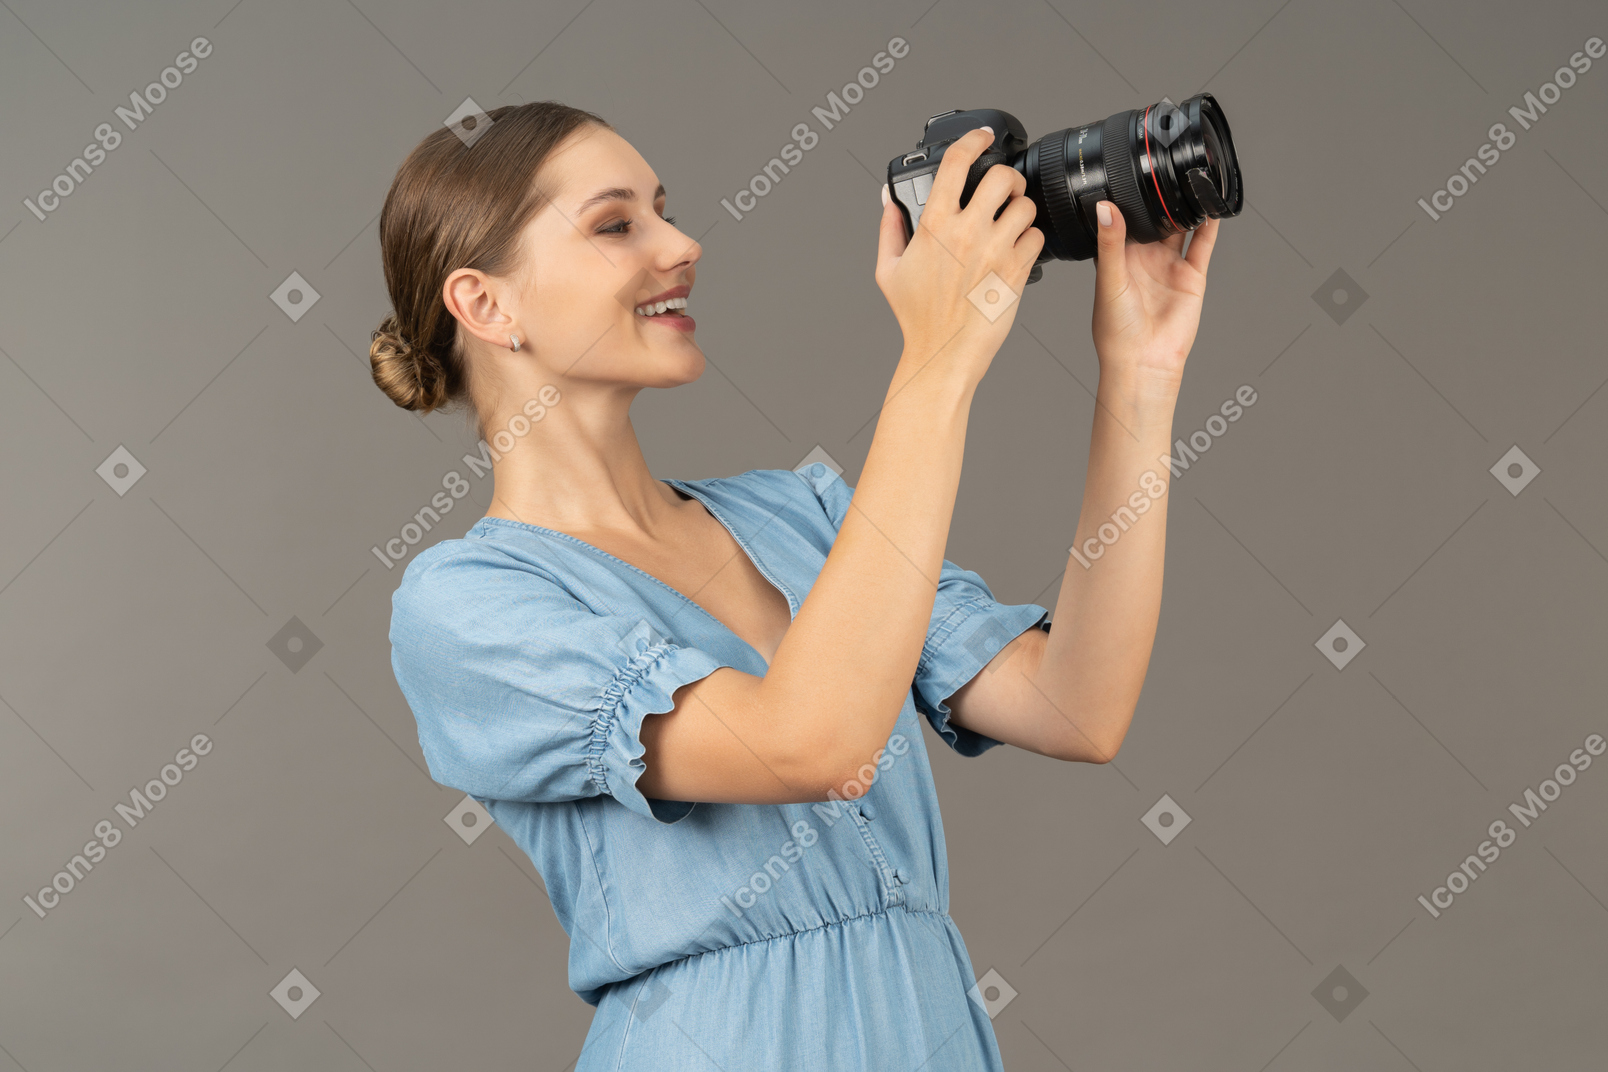 Three-quarter view of a smiling young woman in blue dress taking shot